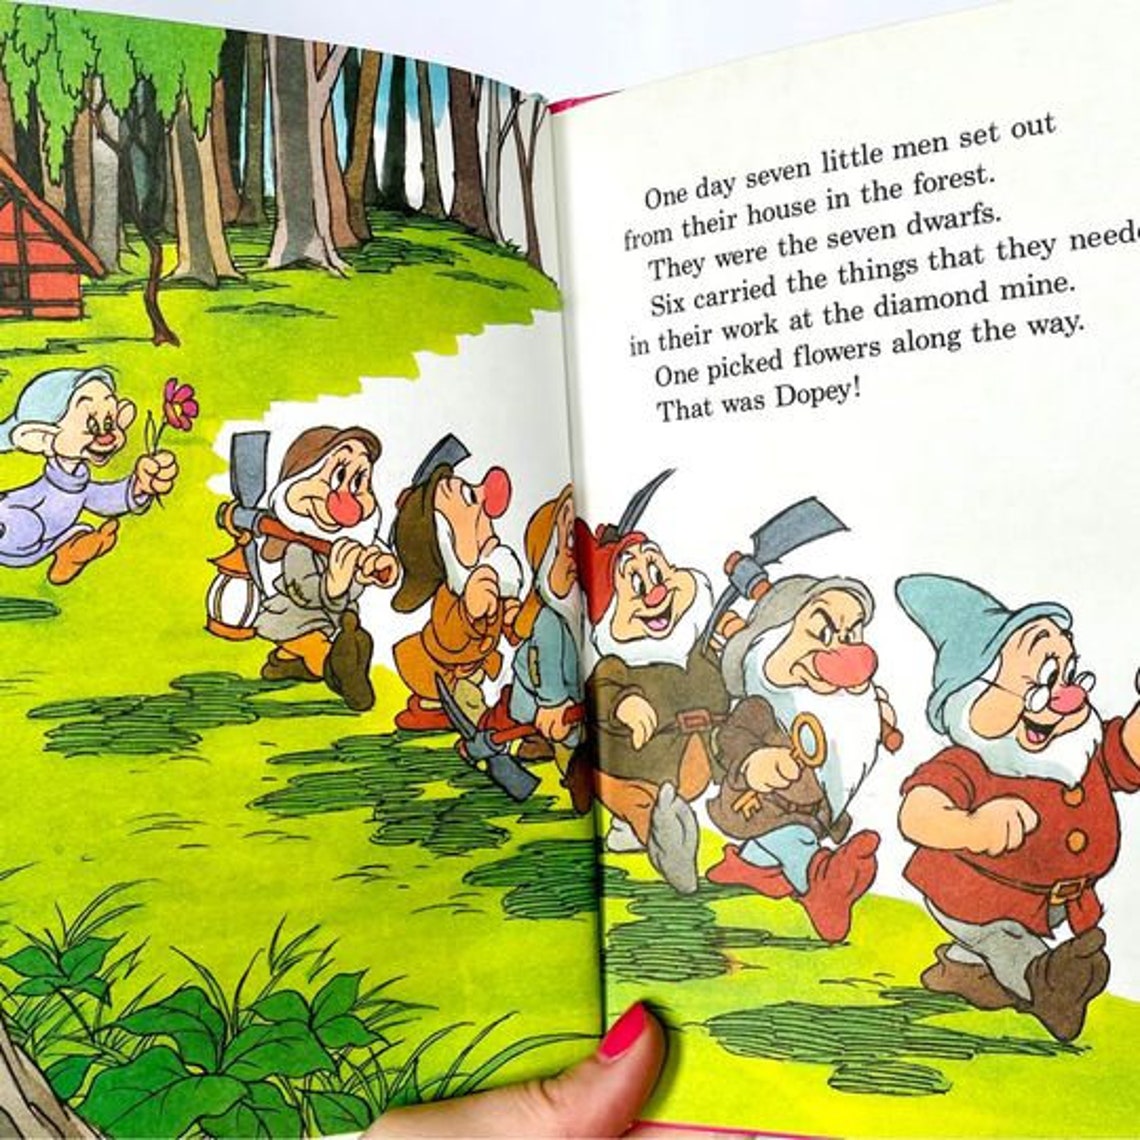 1973 Snow White and the Seven Dwarfs & 1982 Dopey Gets Lost by - Etsy UK